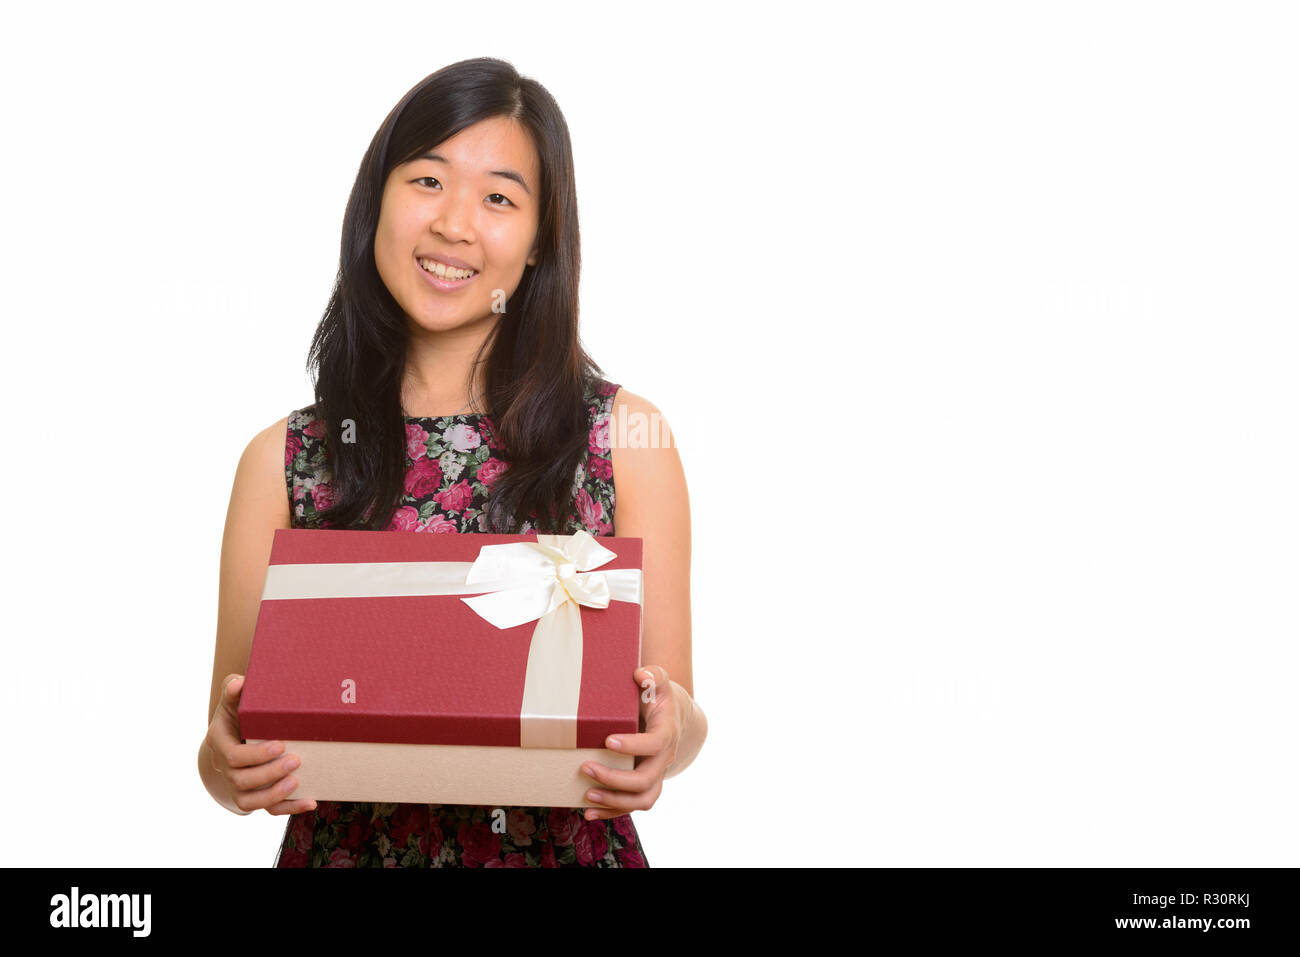 Young happy Asian woman holding gift box Banque D'Images